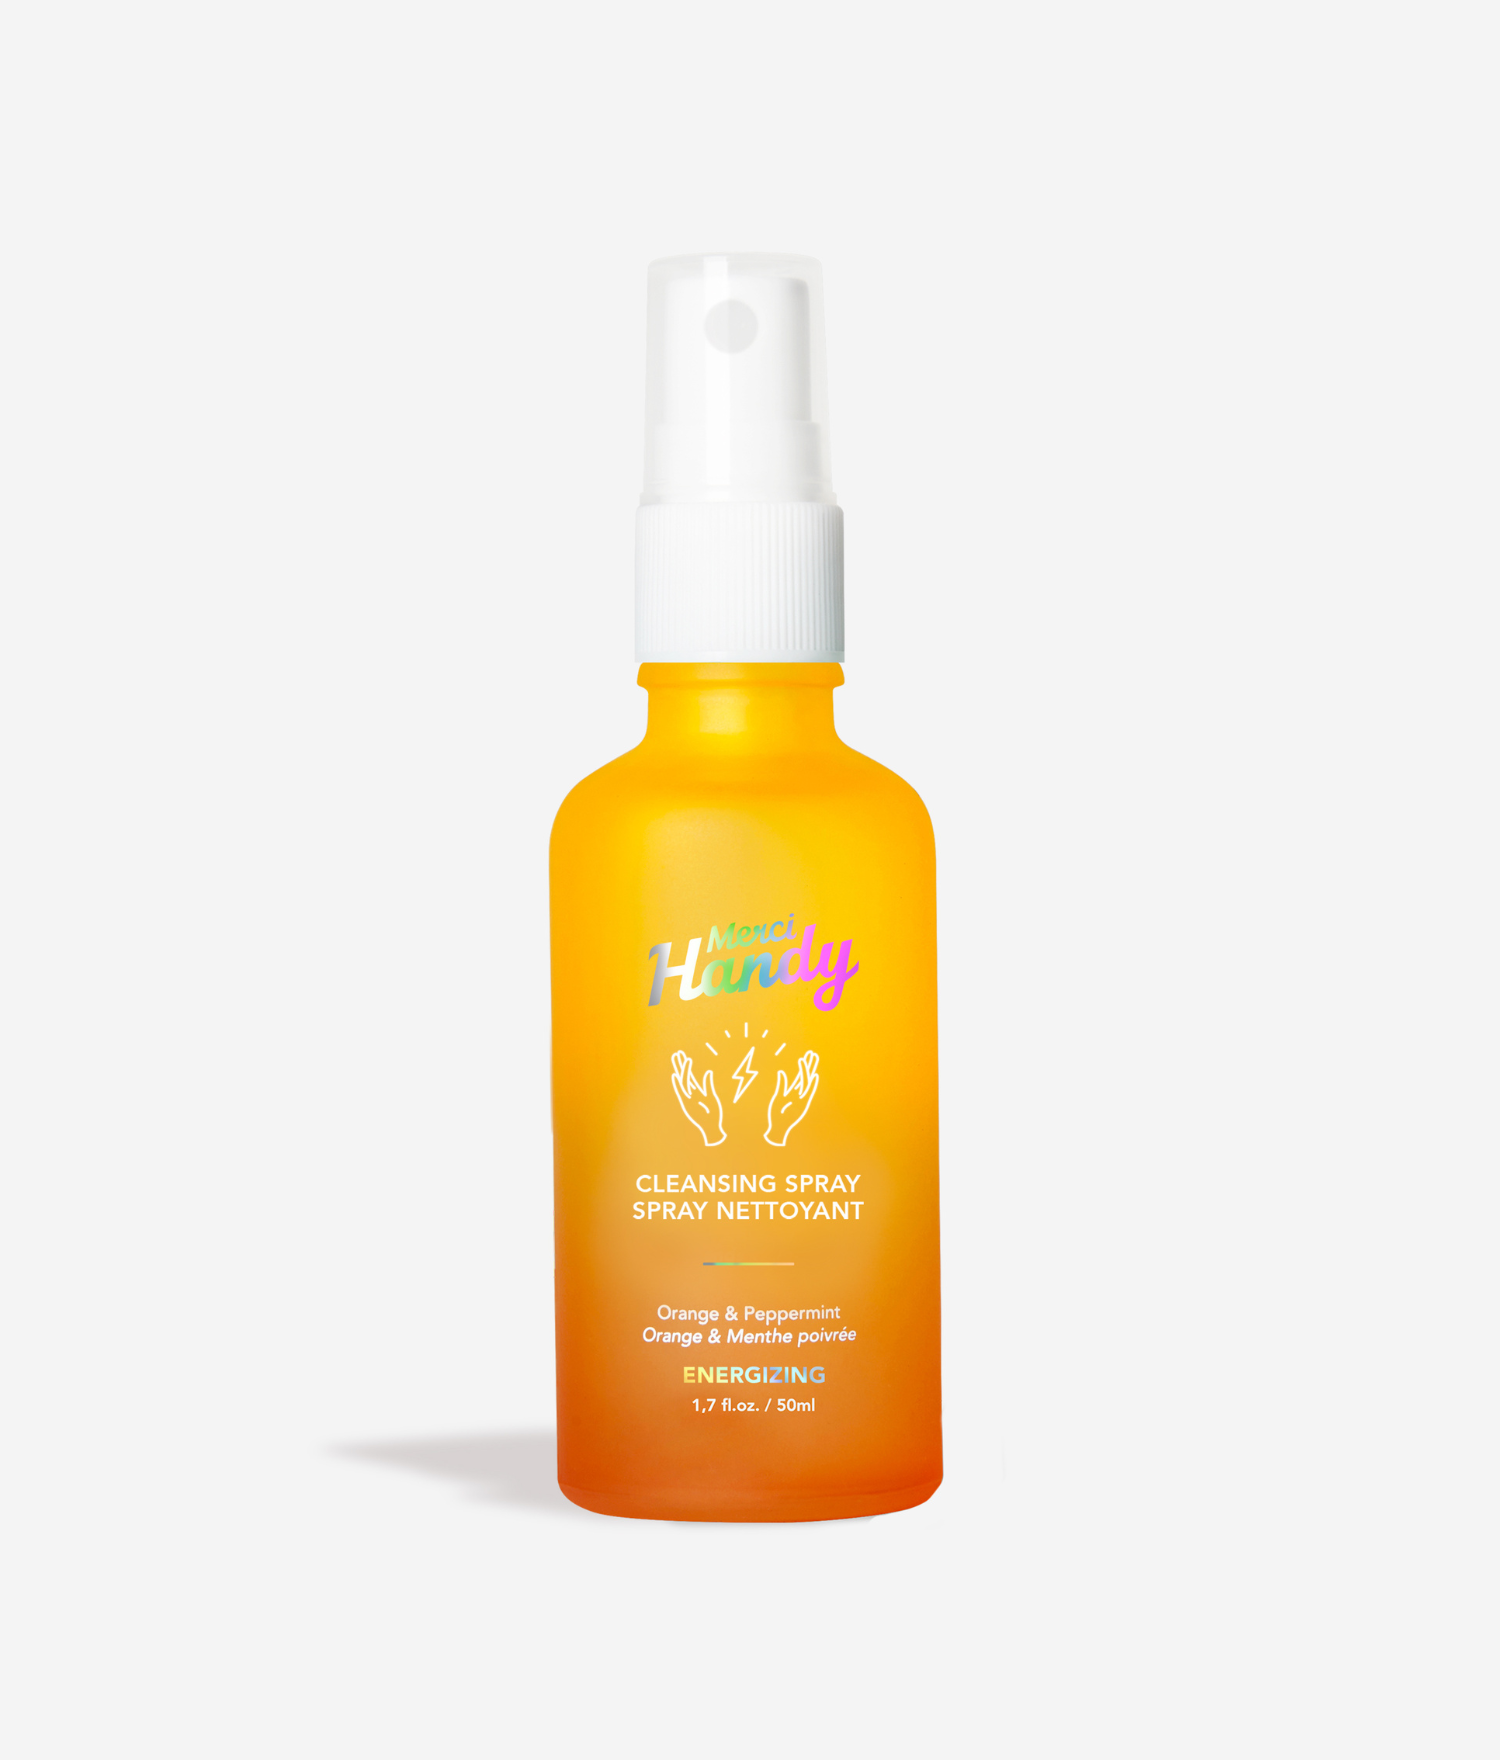 Energizing Hand Cleansing Spray